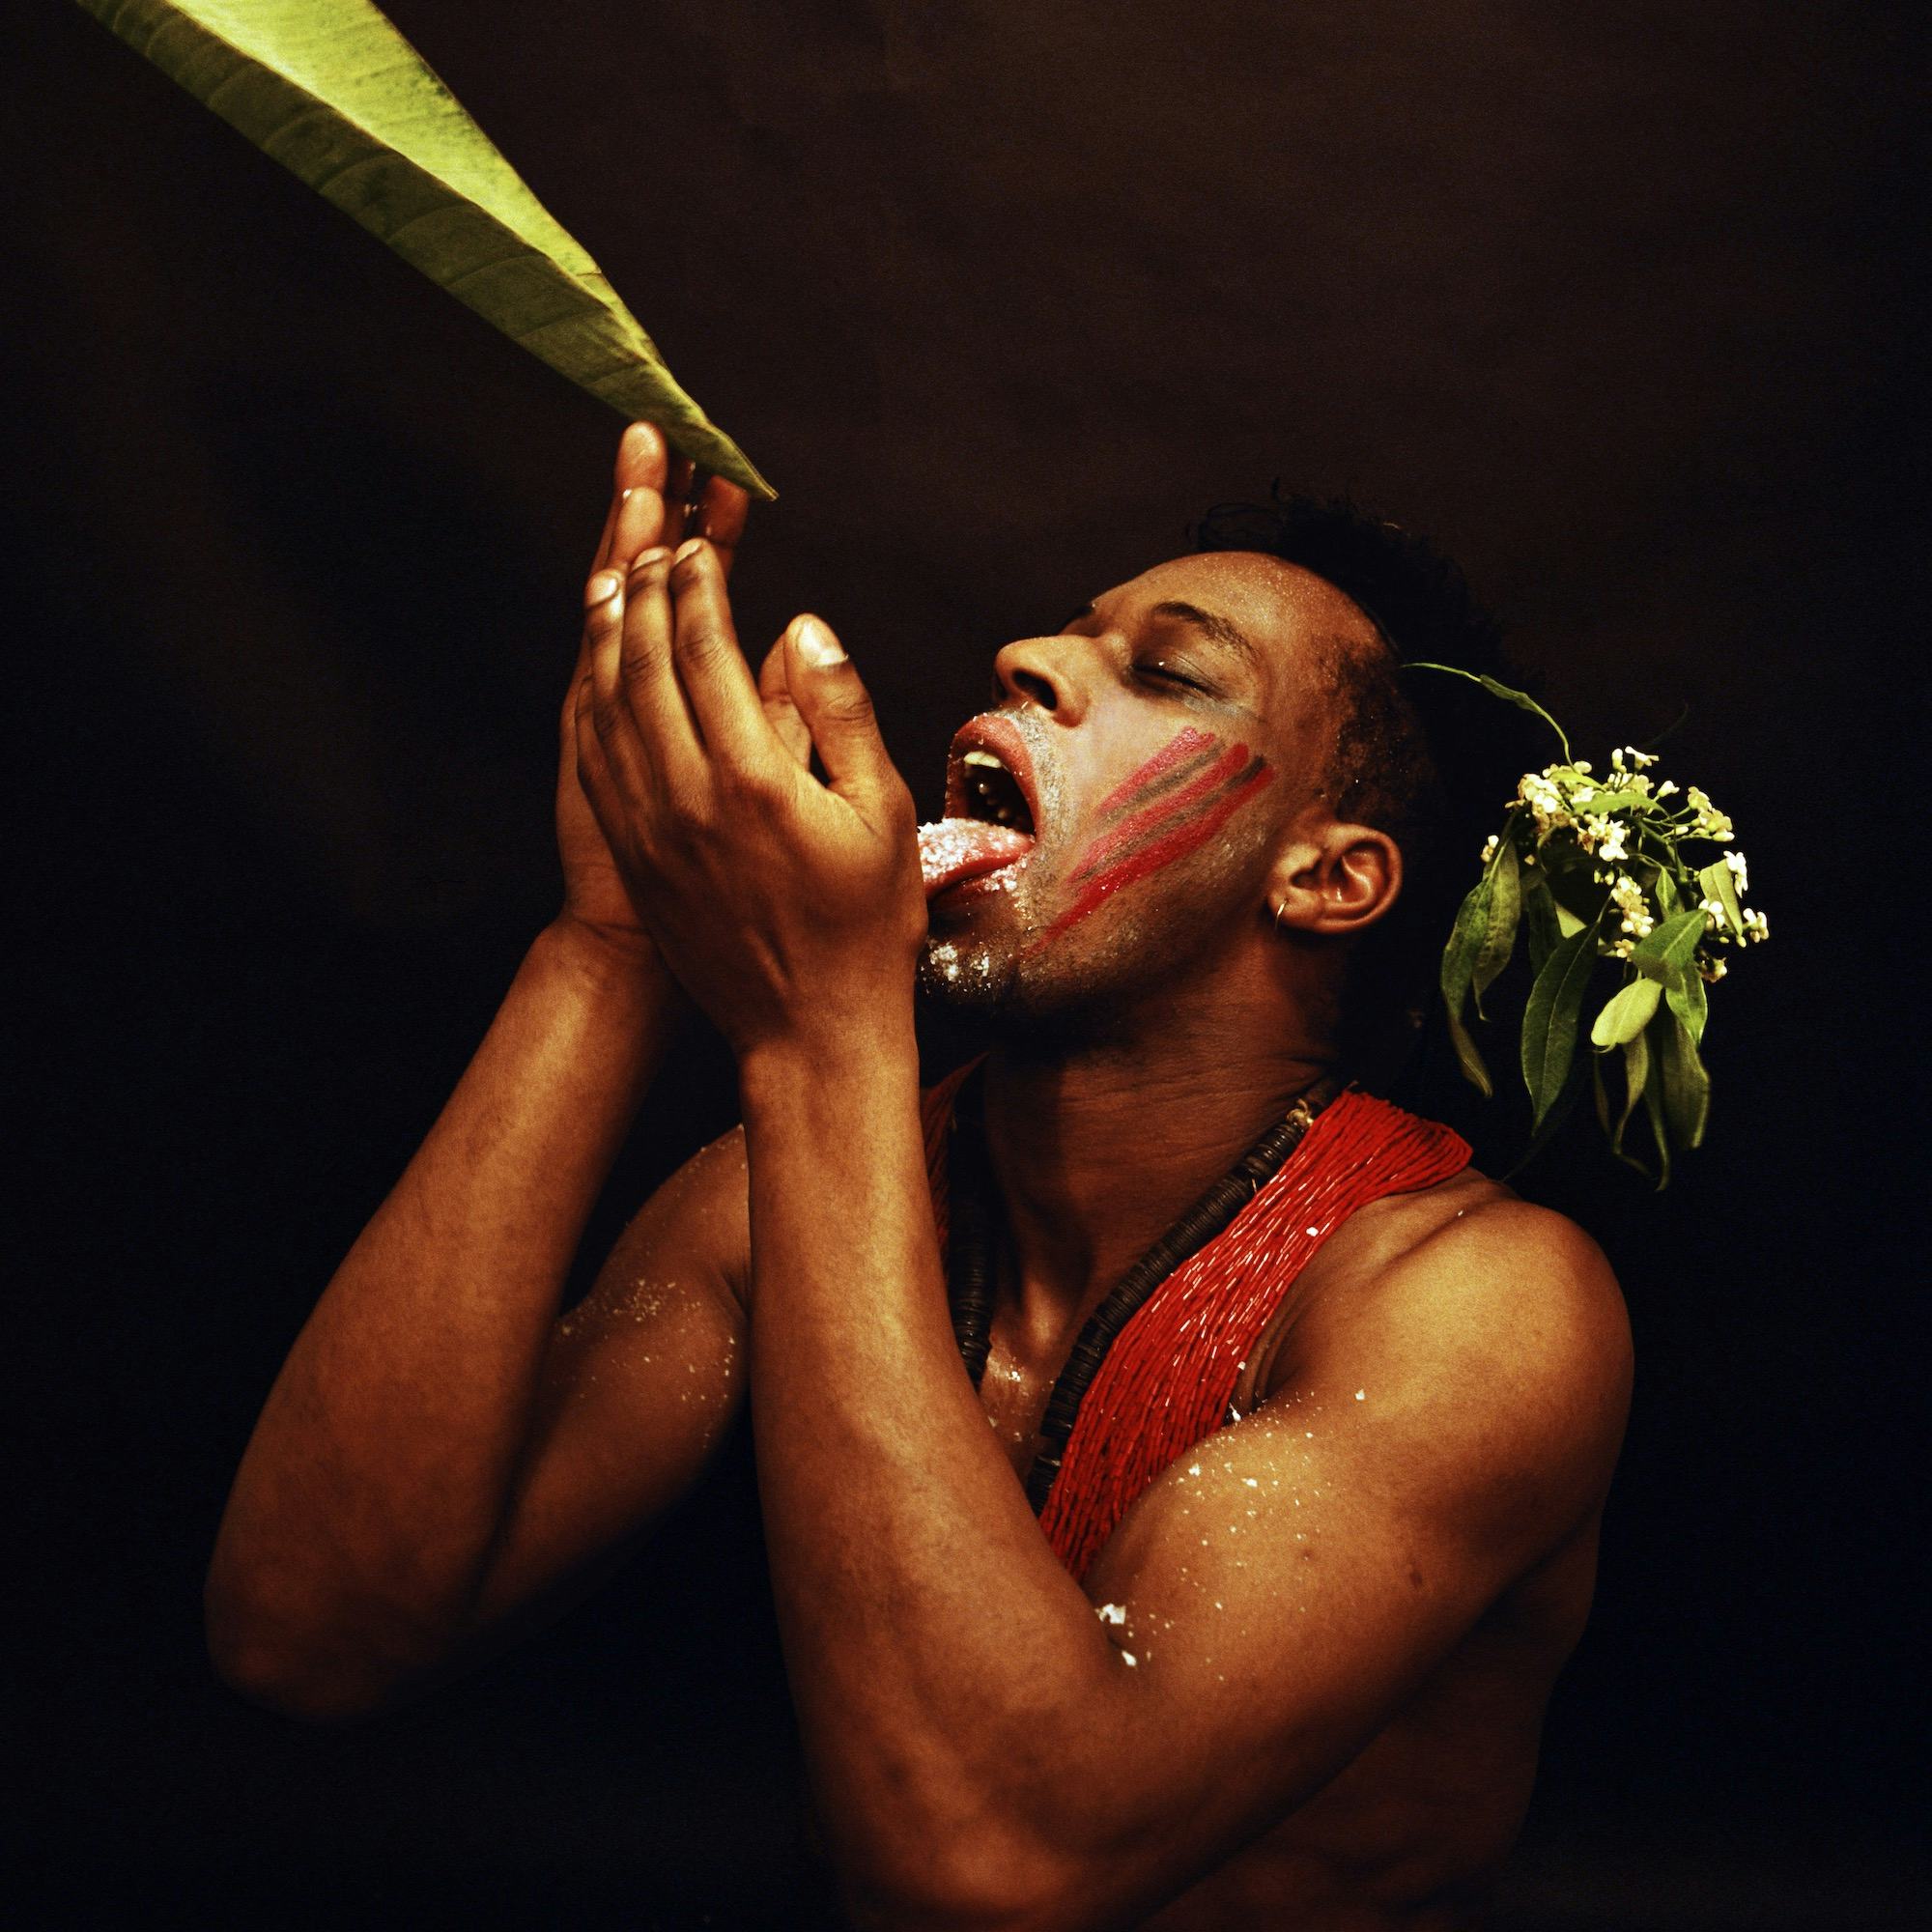 A photograph of a black muscular person, holding up their hands and with their tongue out to consume something that appears to drip of a leave.